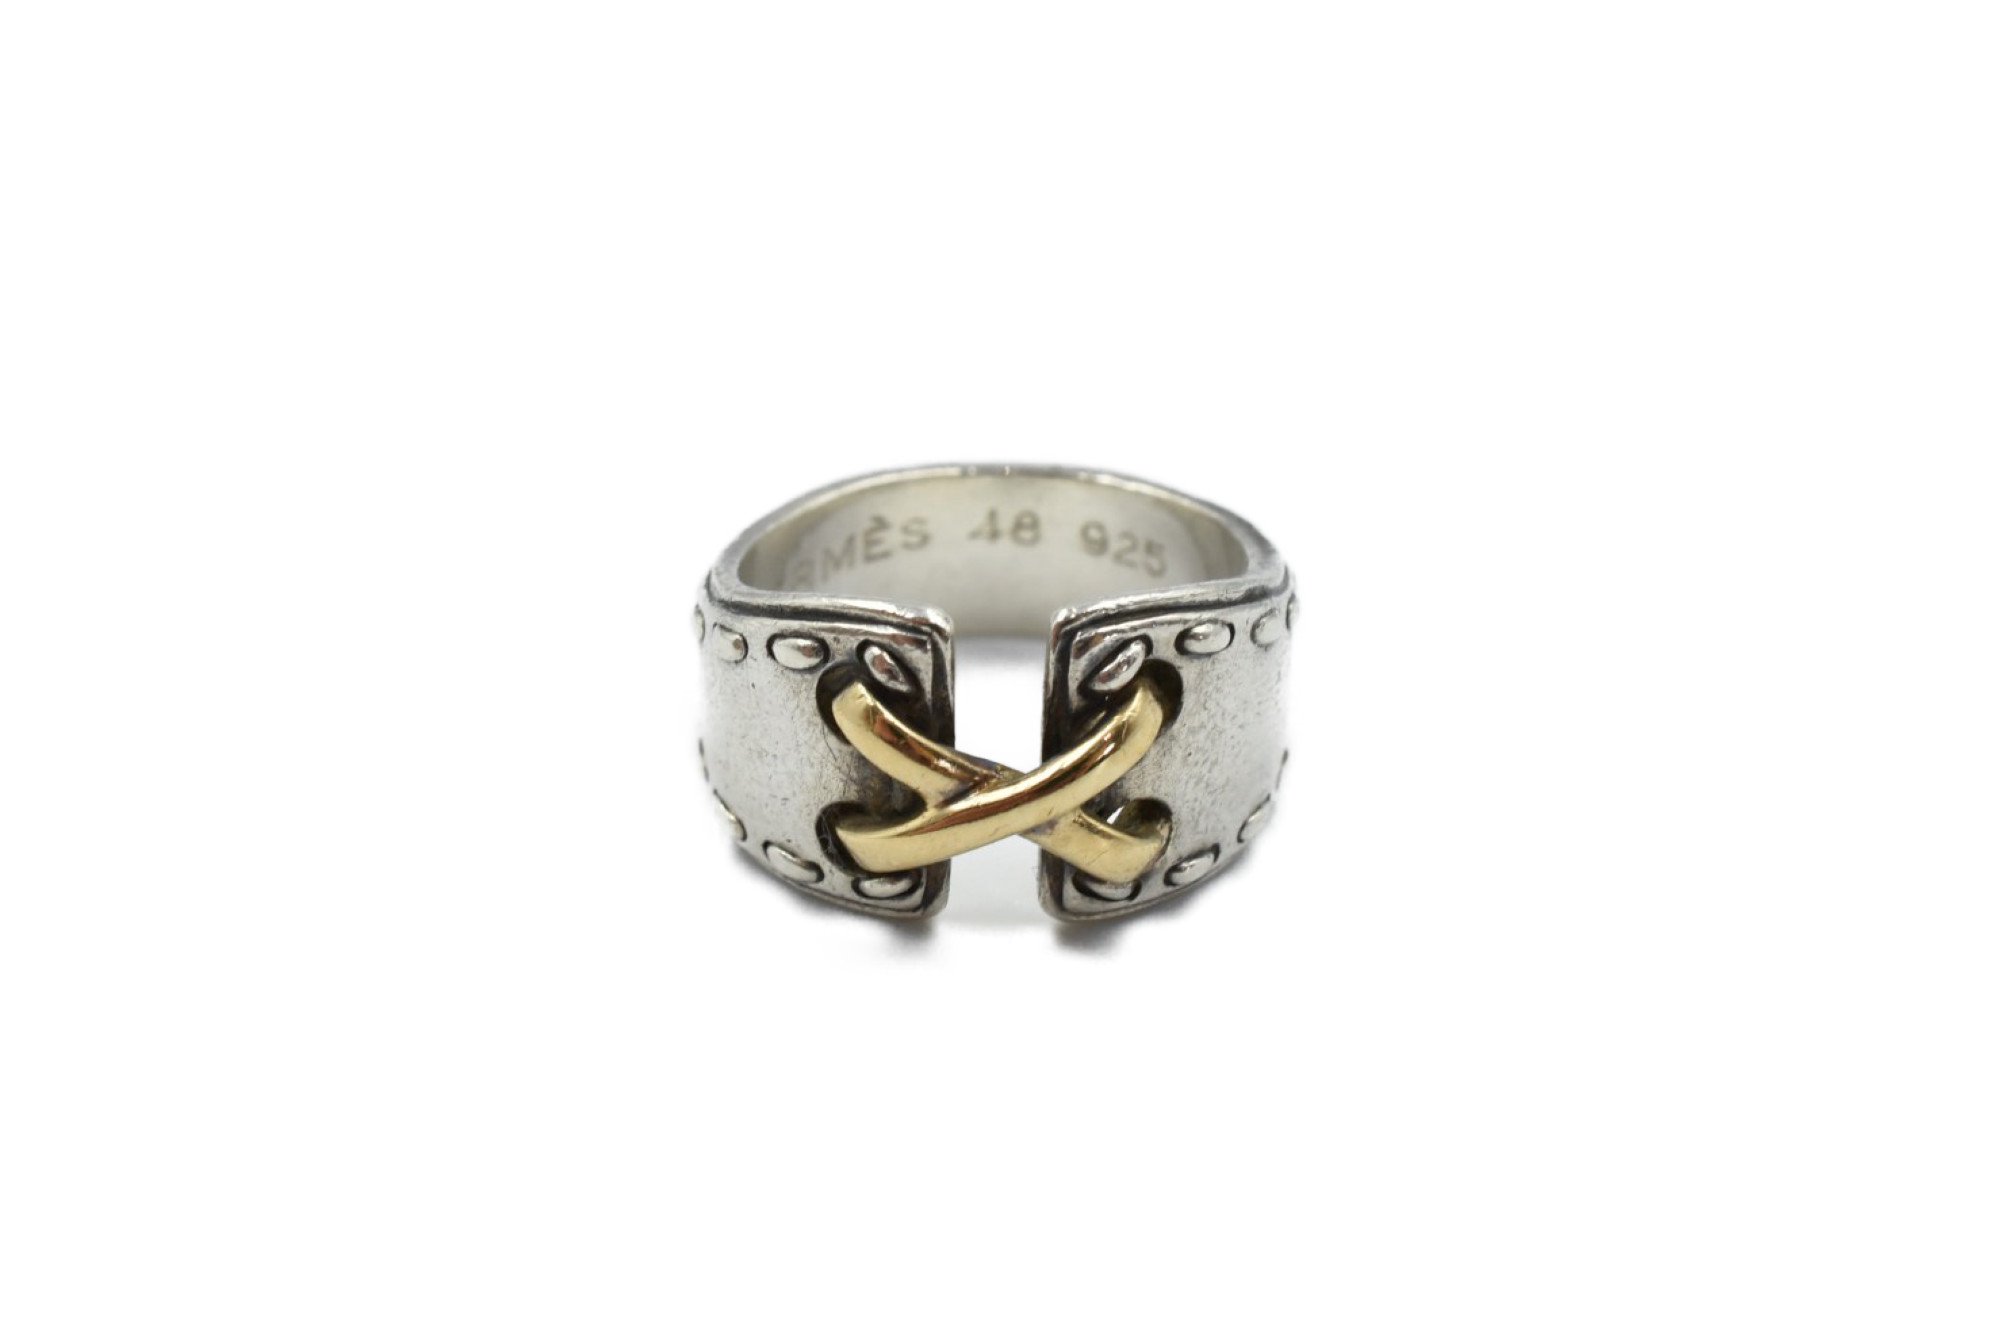 HERMES _ MEXICO RING COMBI 925 / 750